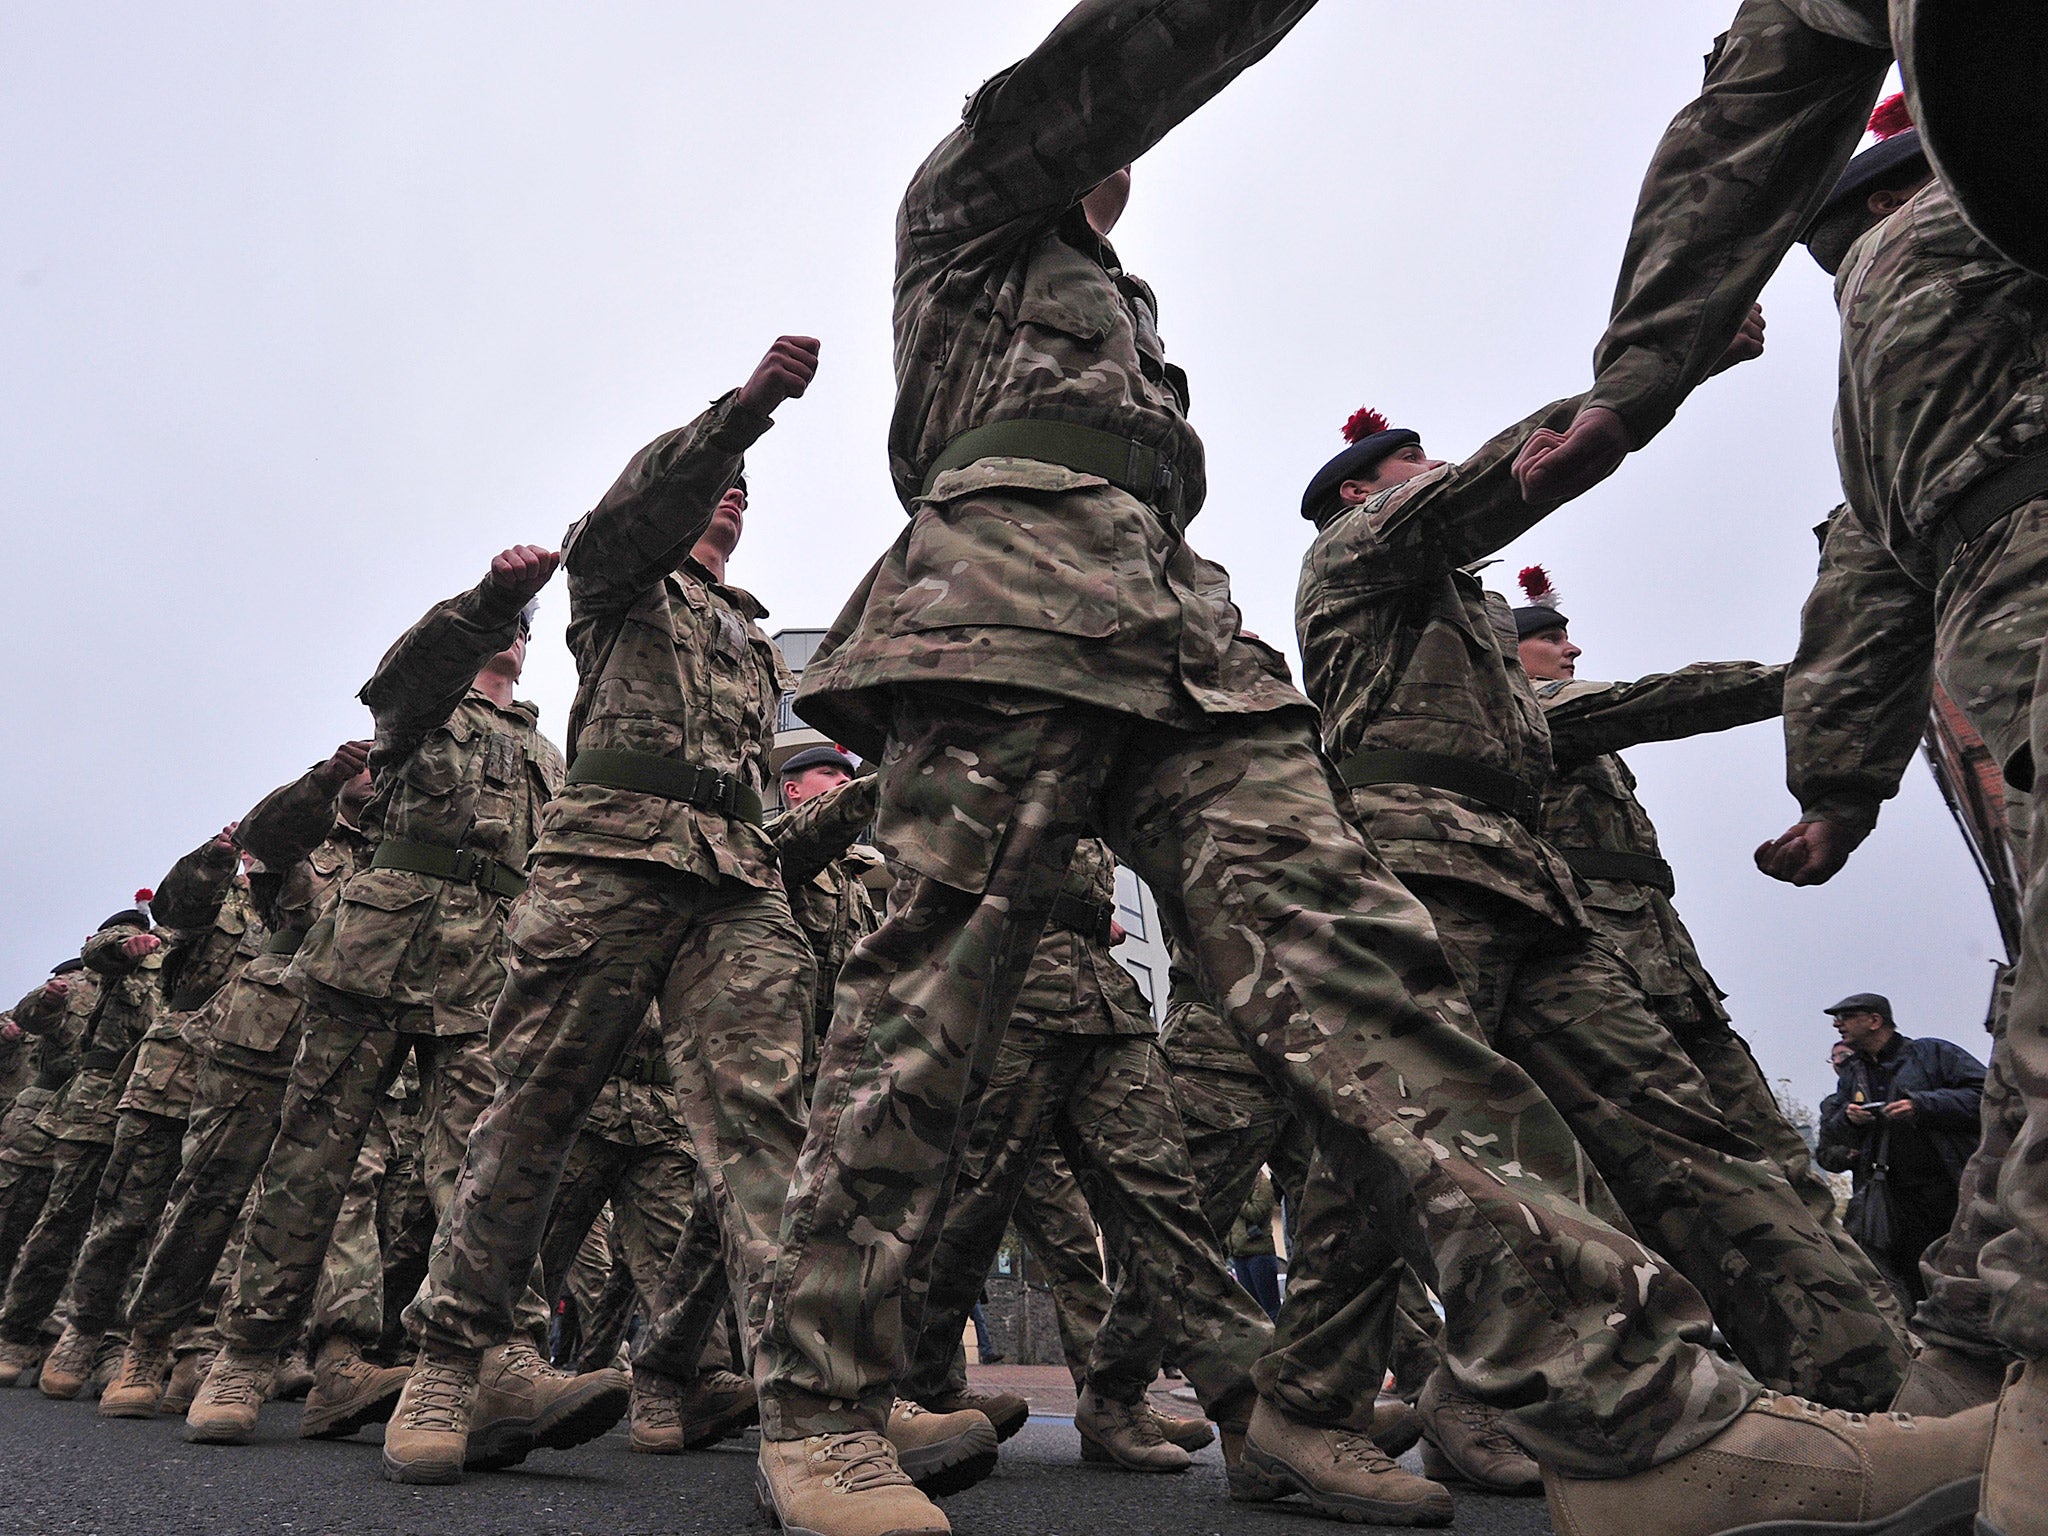 Around 1.3 per cent of the Armed Forces are under 18